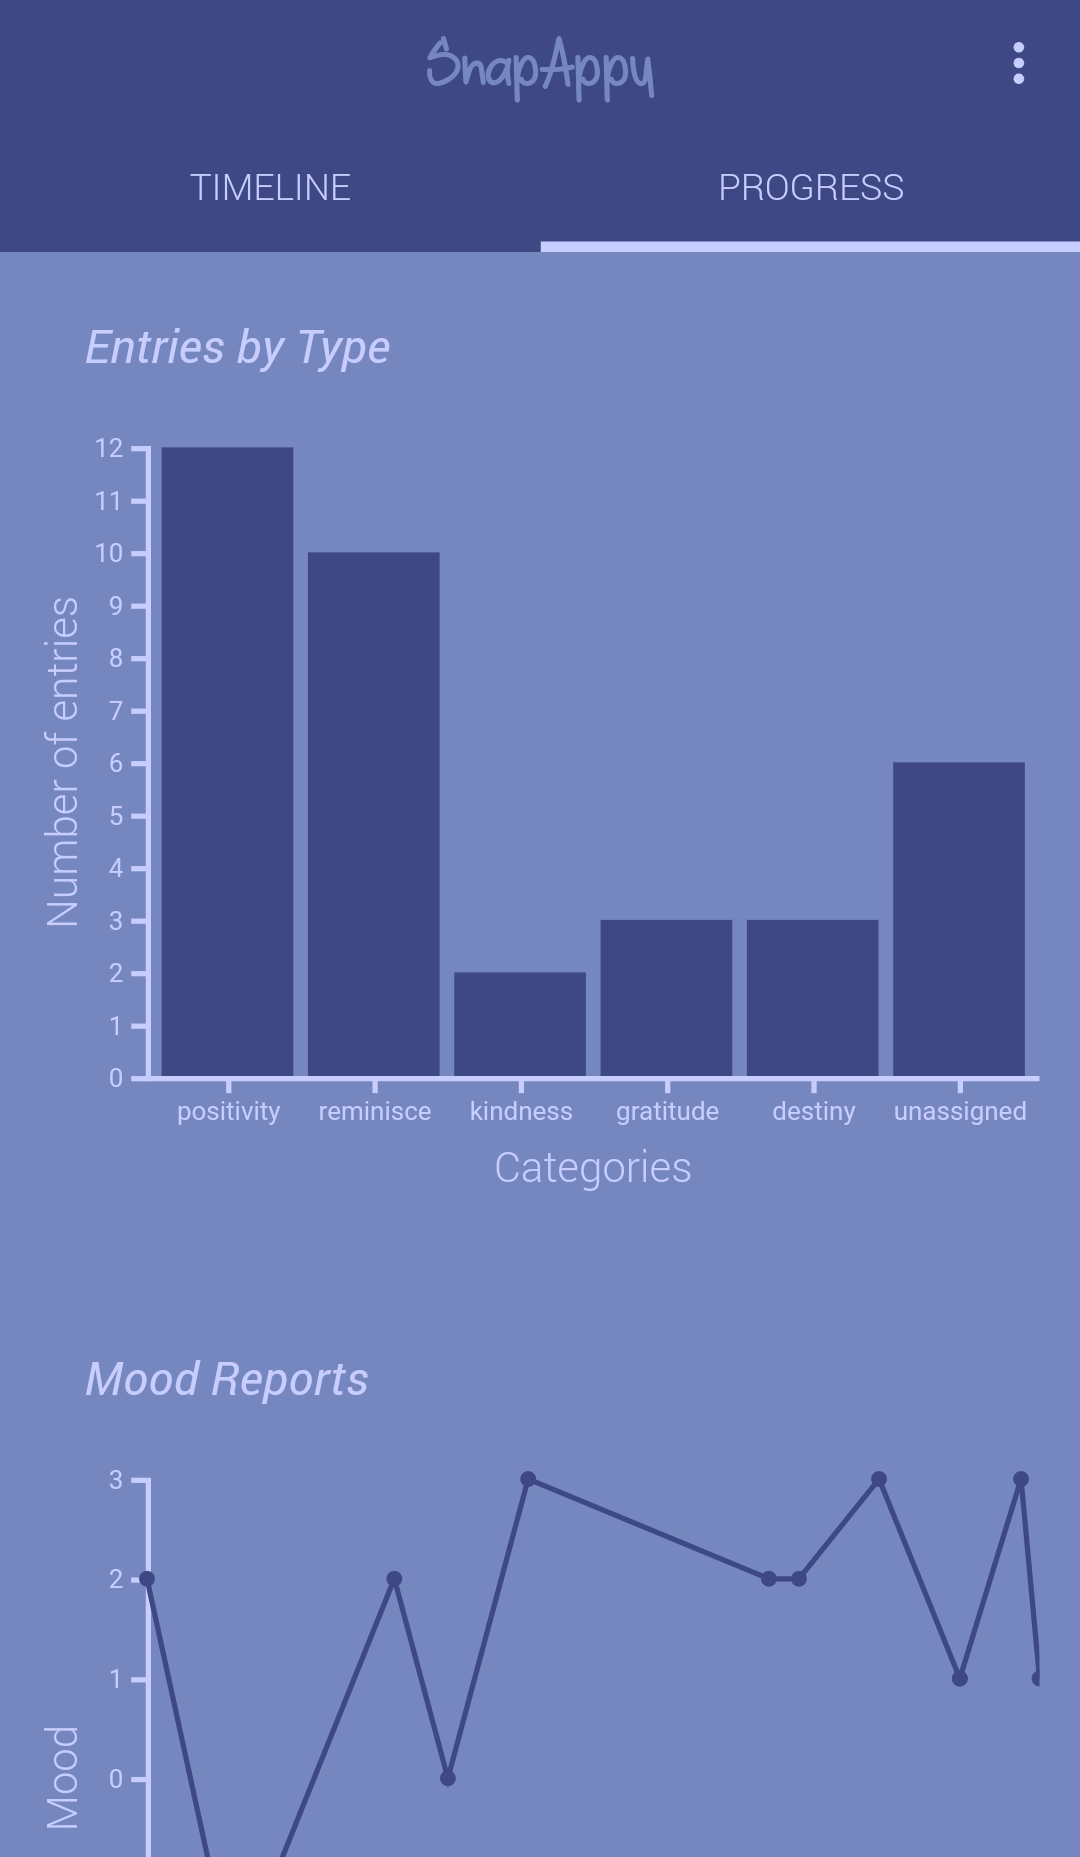 A bar chart displaying the number of entries per category, and a line chart displaying mood scores per day.